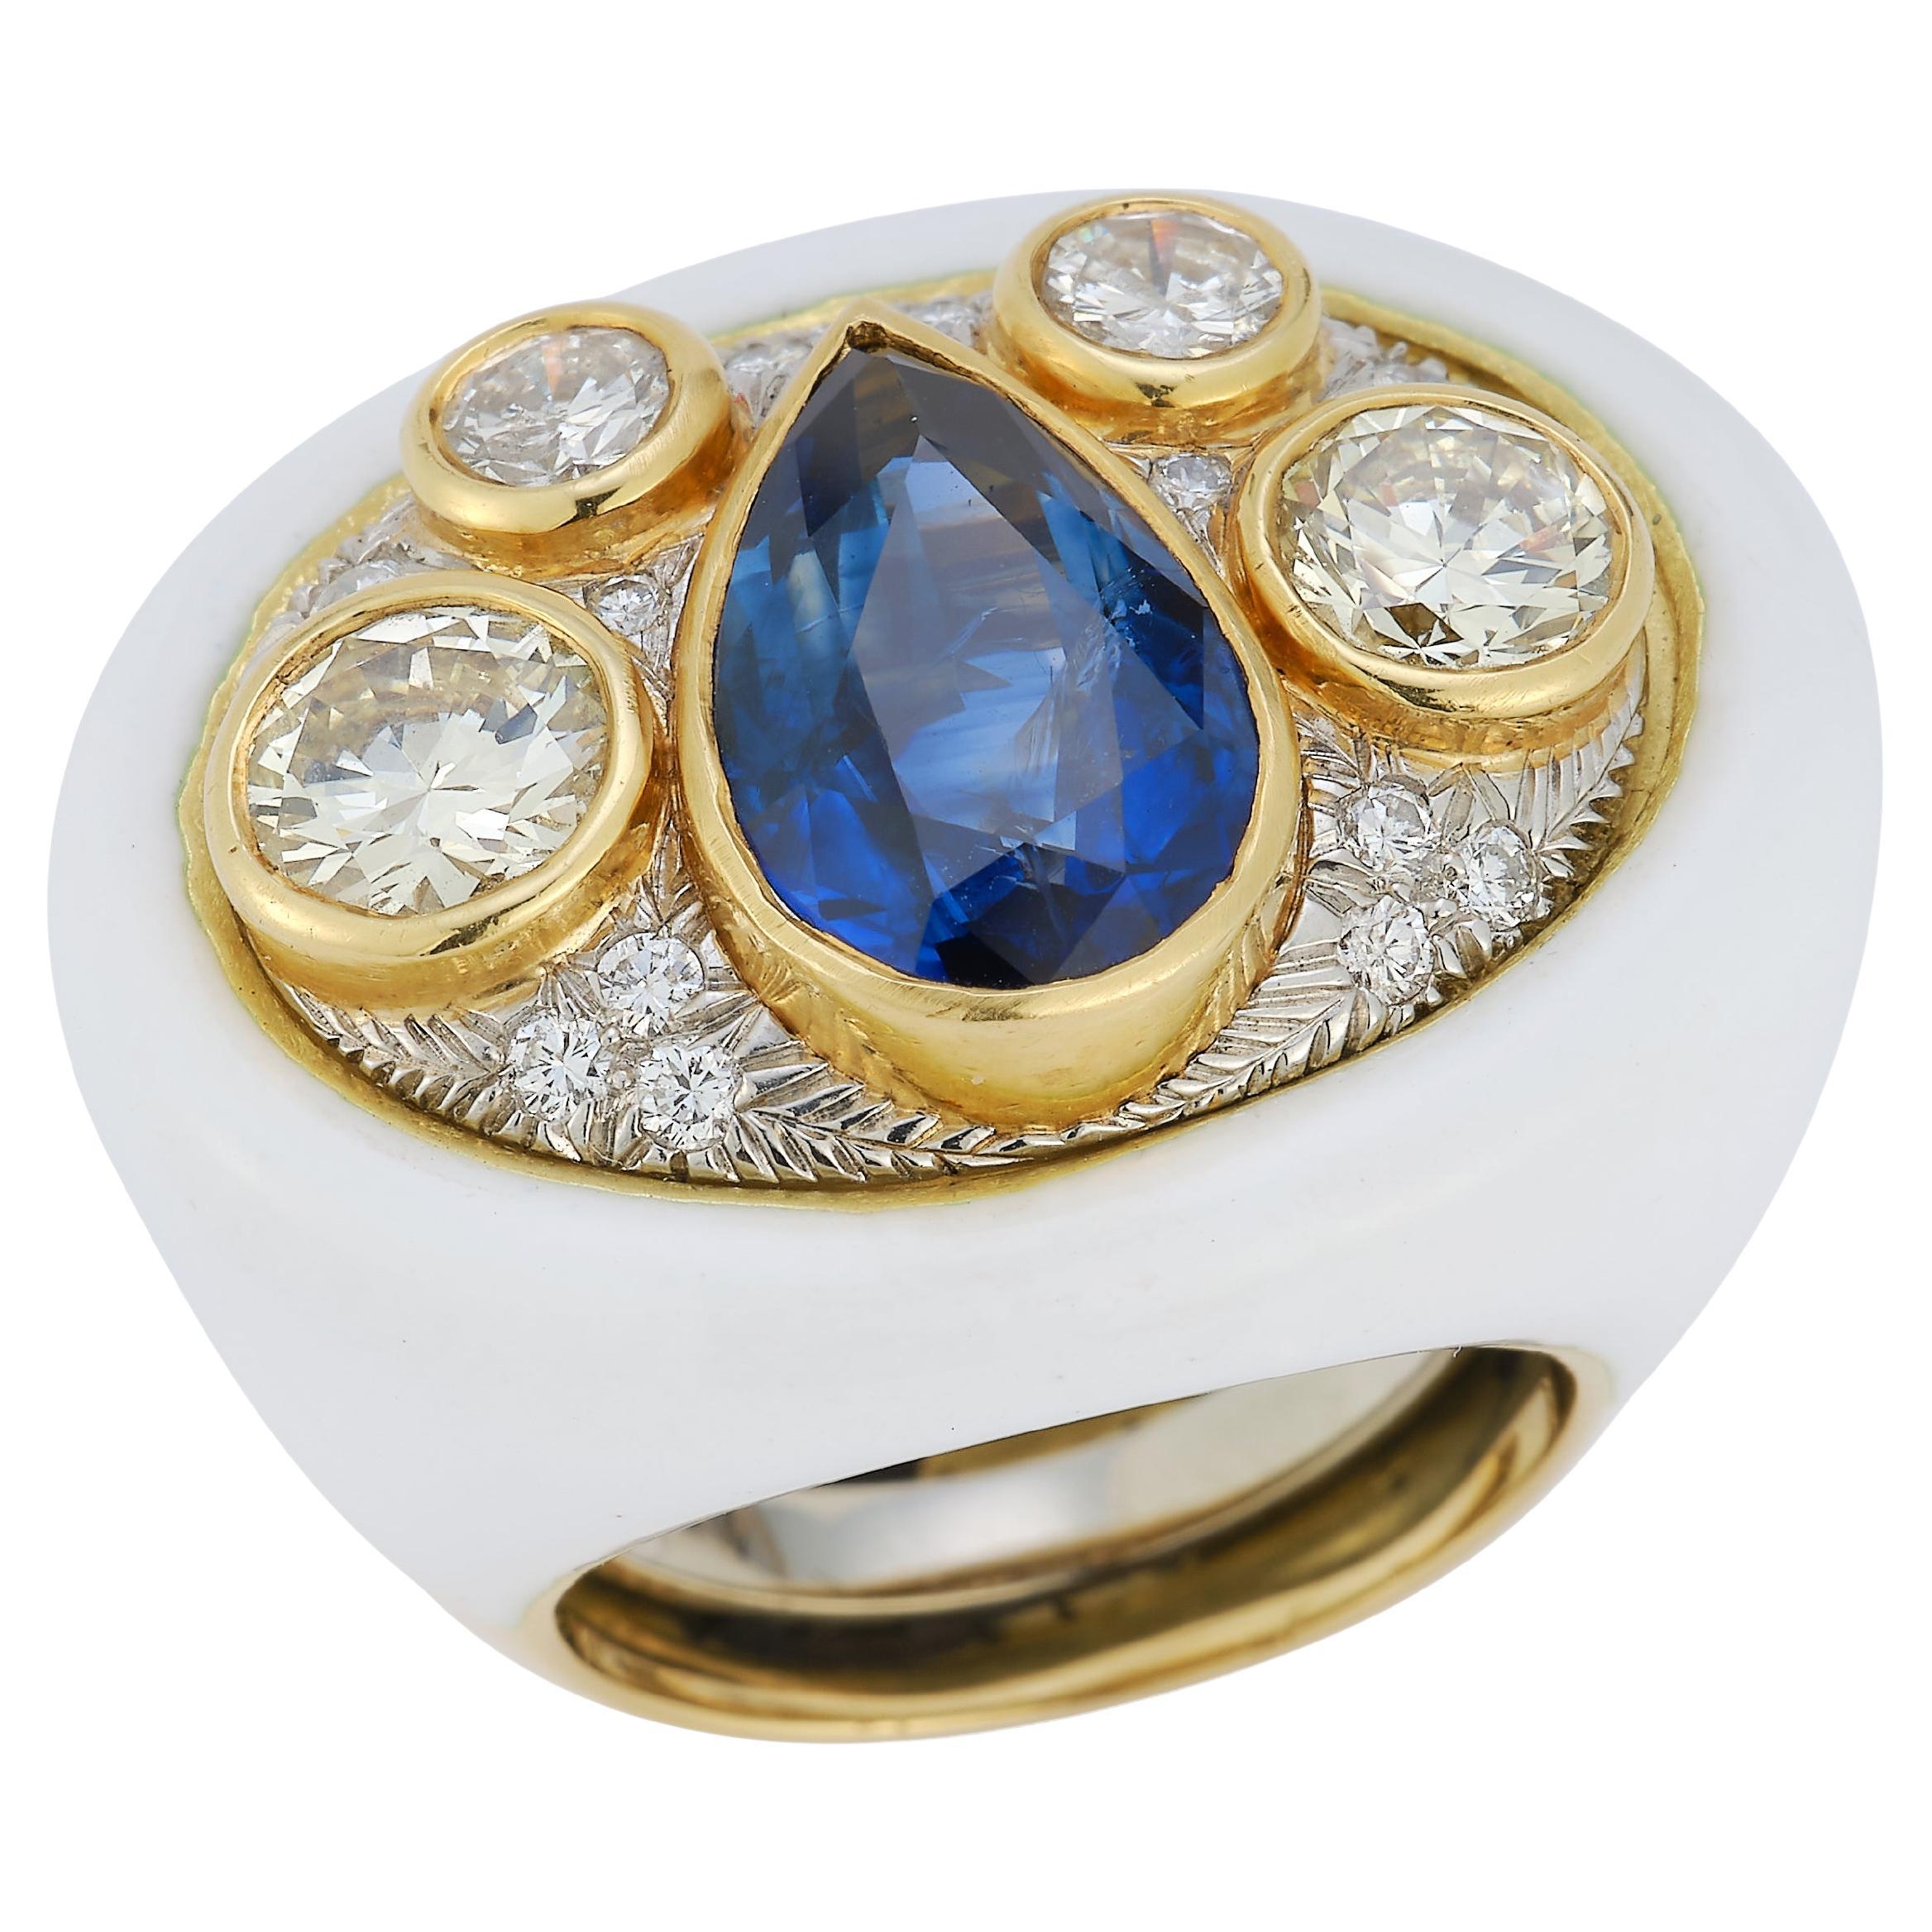 Sapphire Diamond and White Enamel Ring by Andrew Clunn